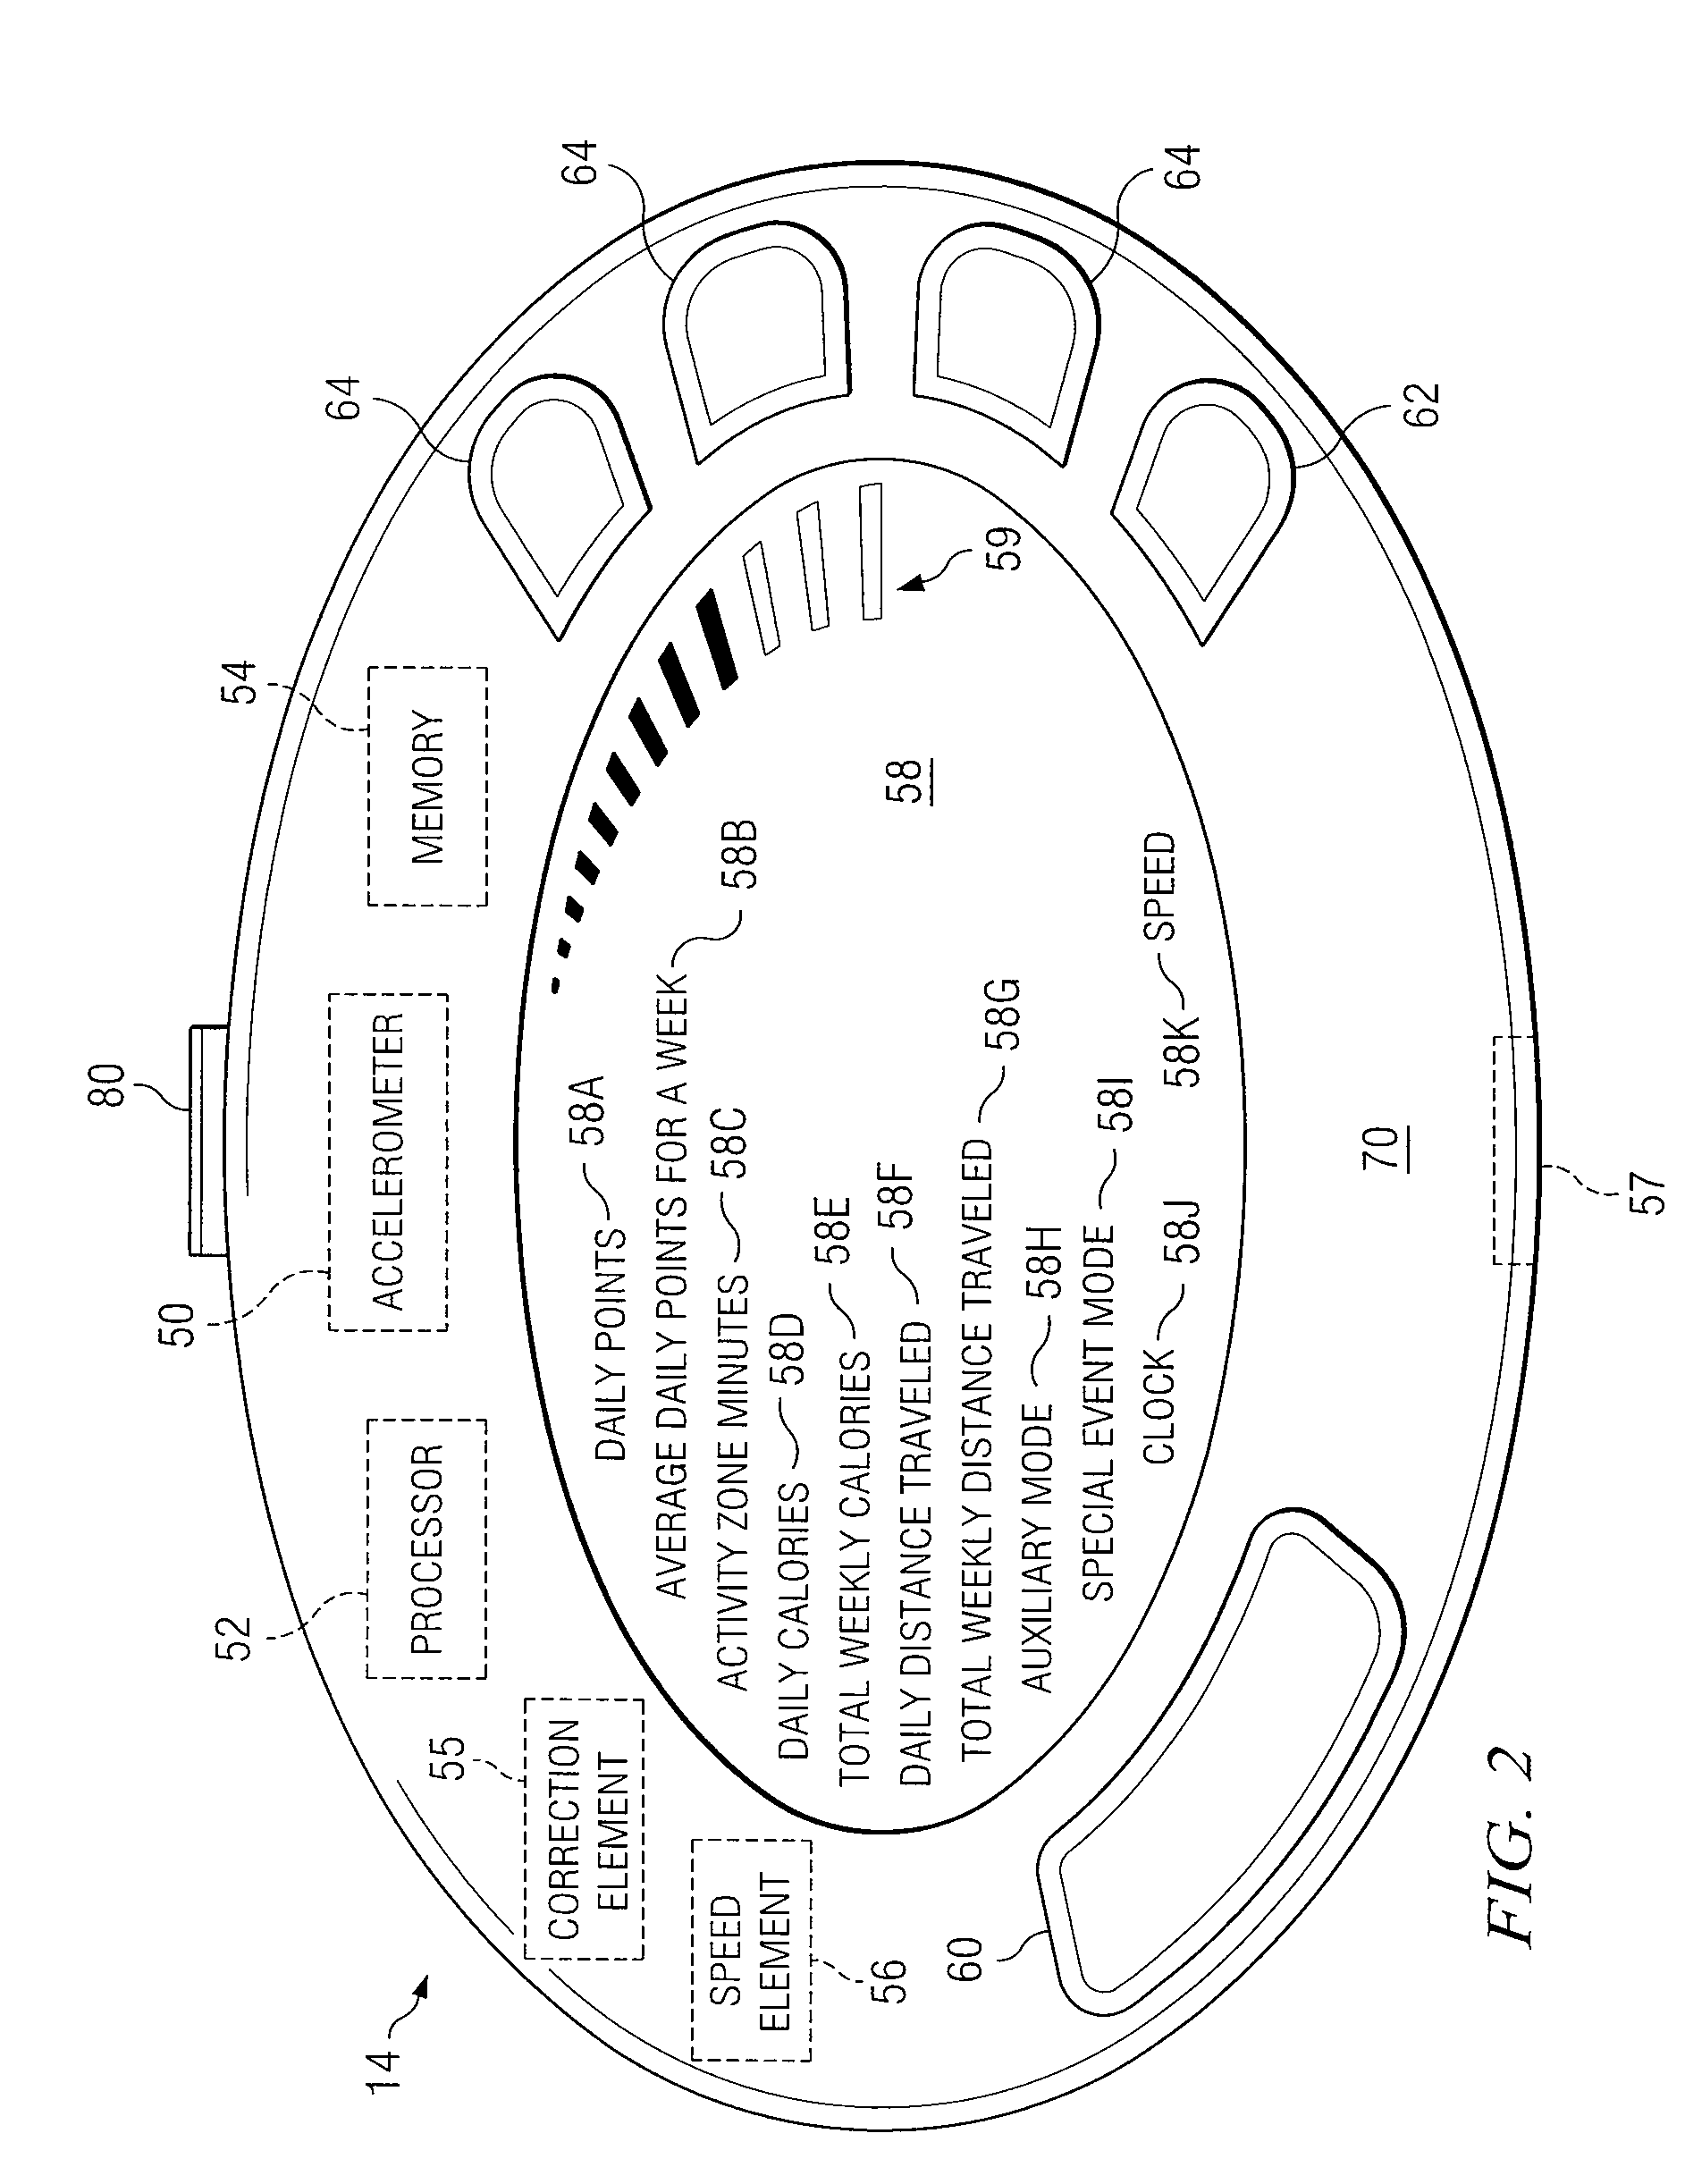 System and Method for Processing Raw Activity Energy Expenditure Data